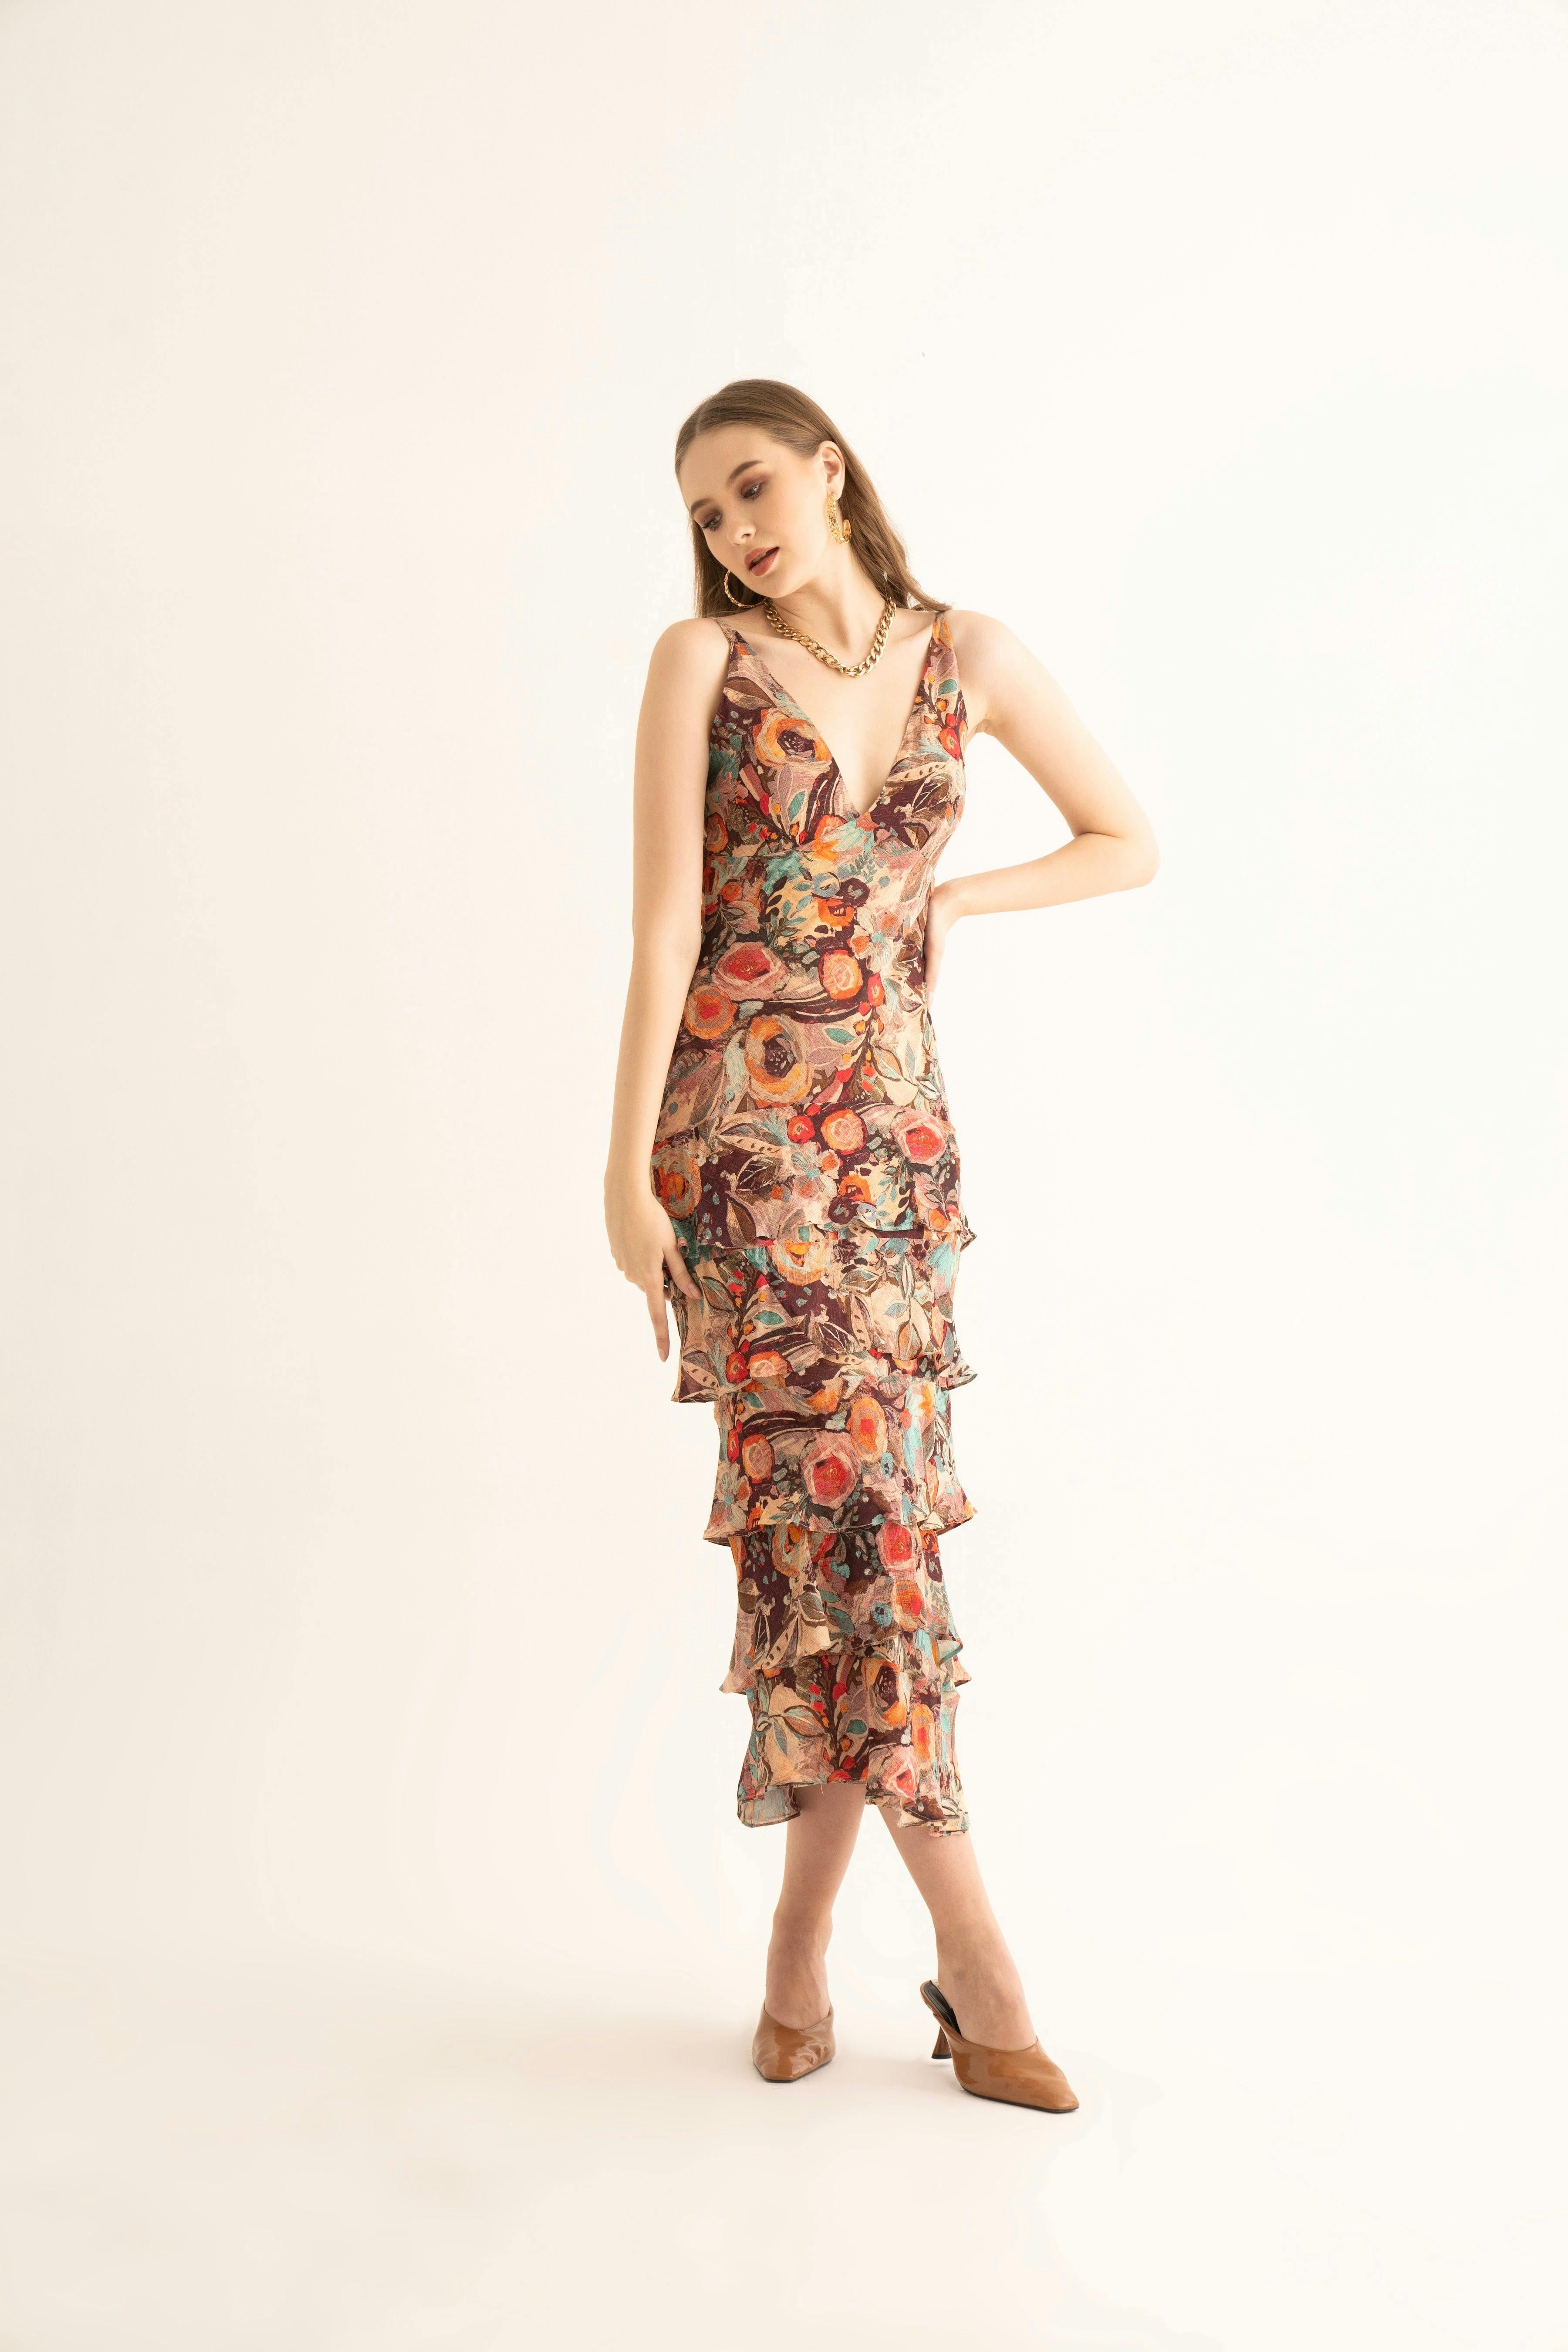 Smudged Floral Maxi Ruffle Dress, a product by Torqadorn